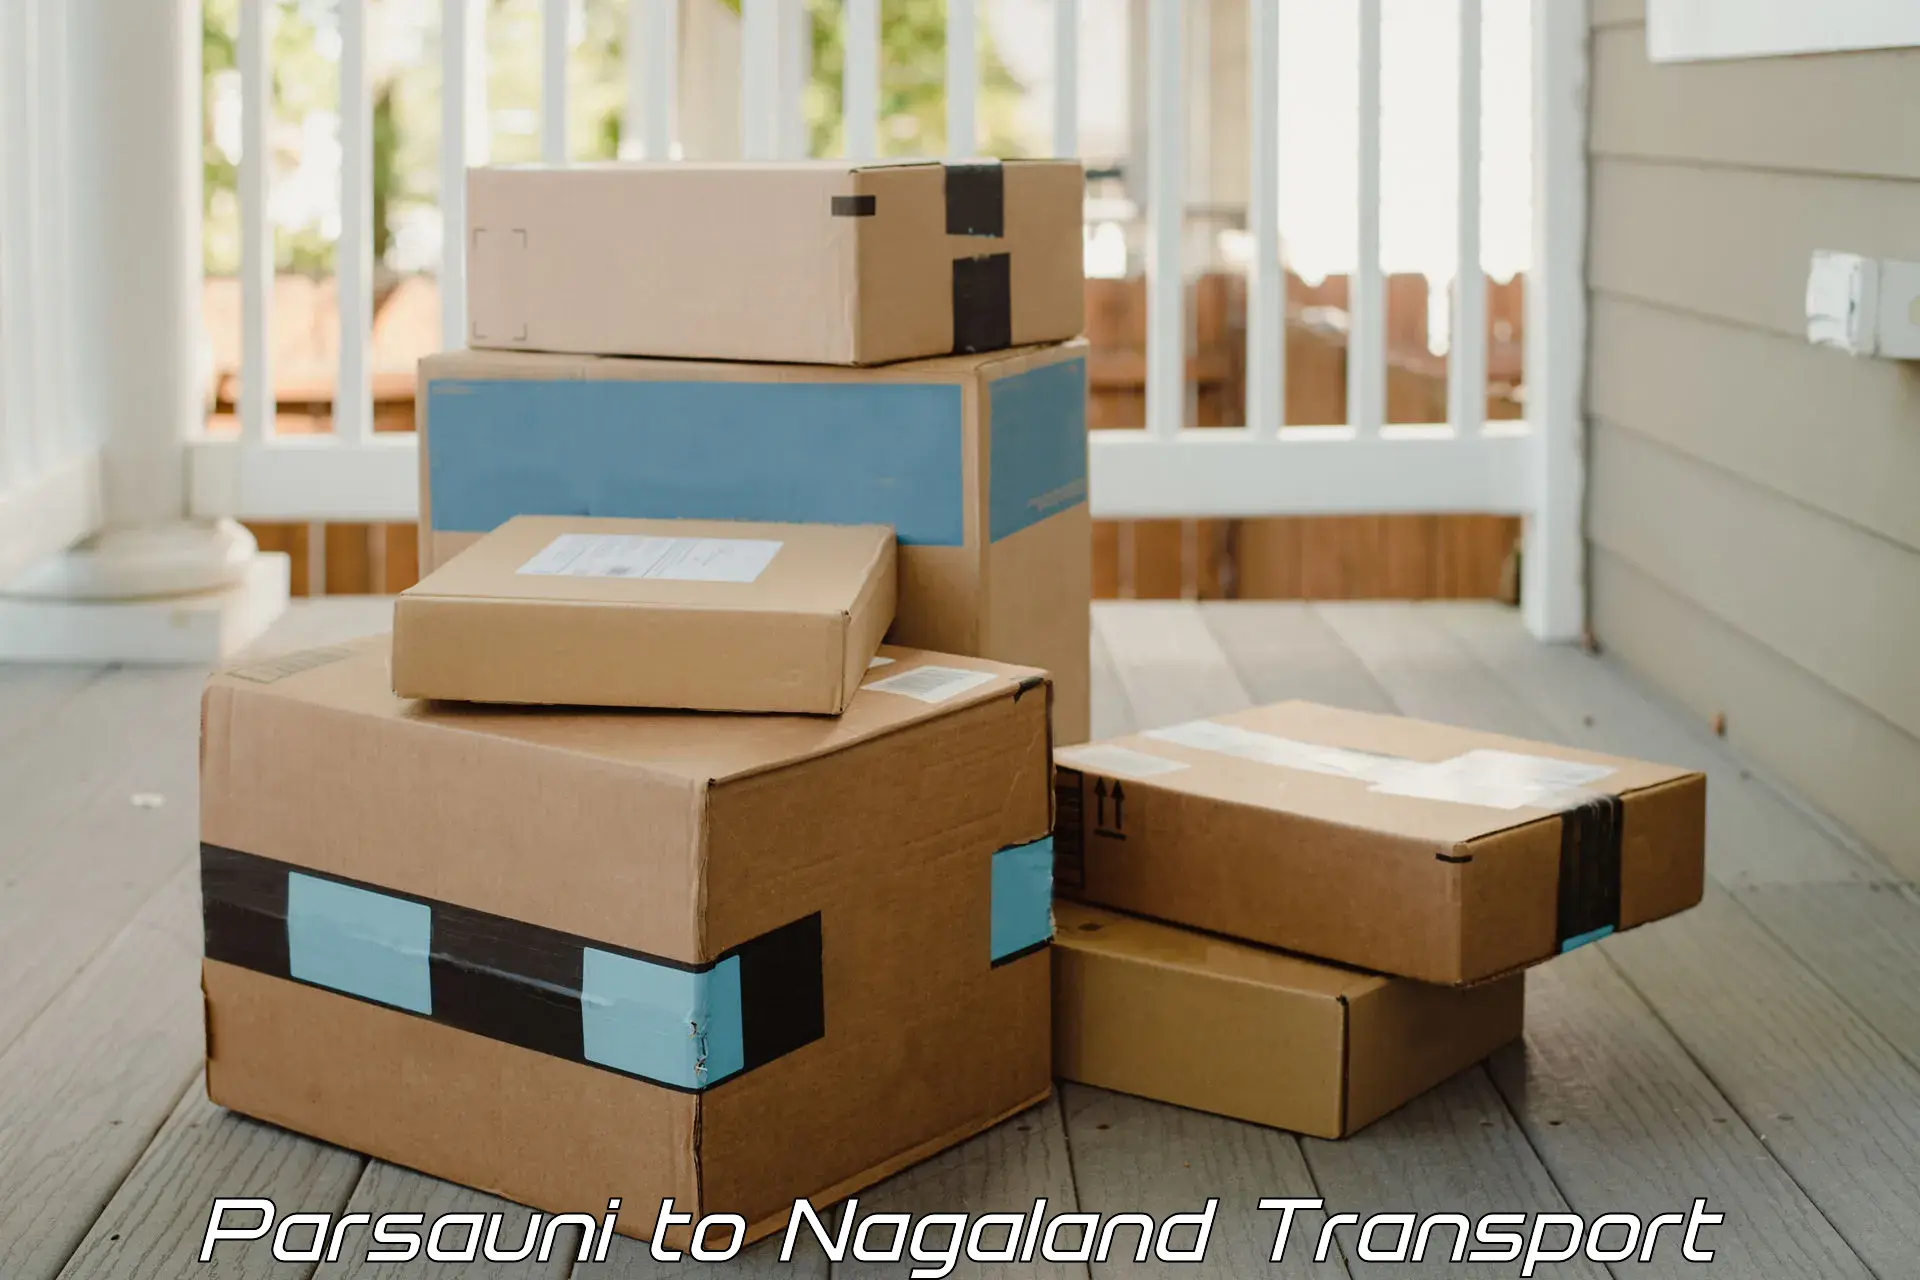 Delivery service Parsauni to Nagaland